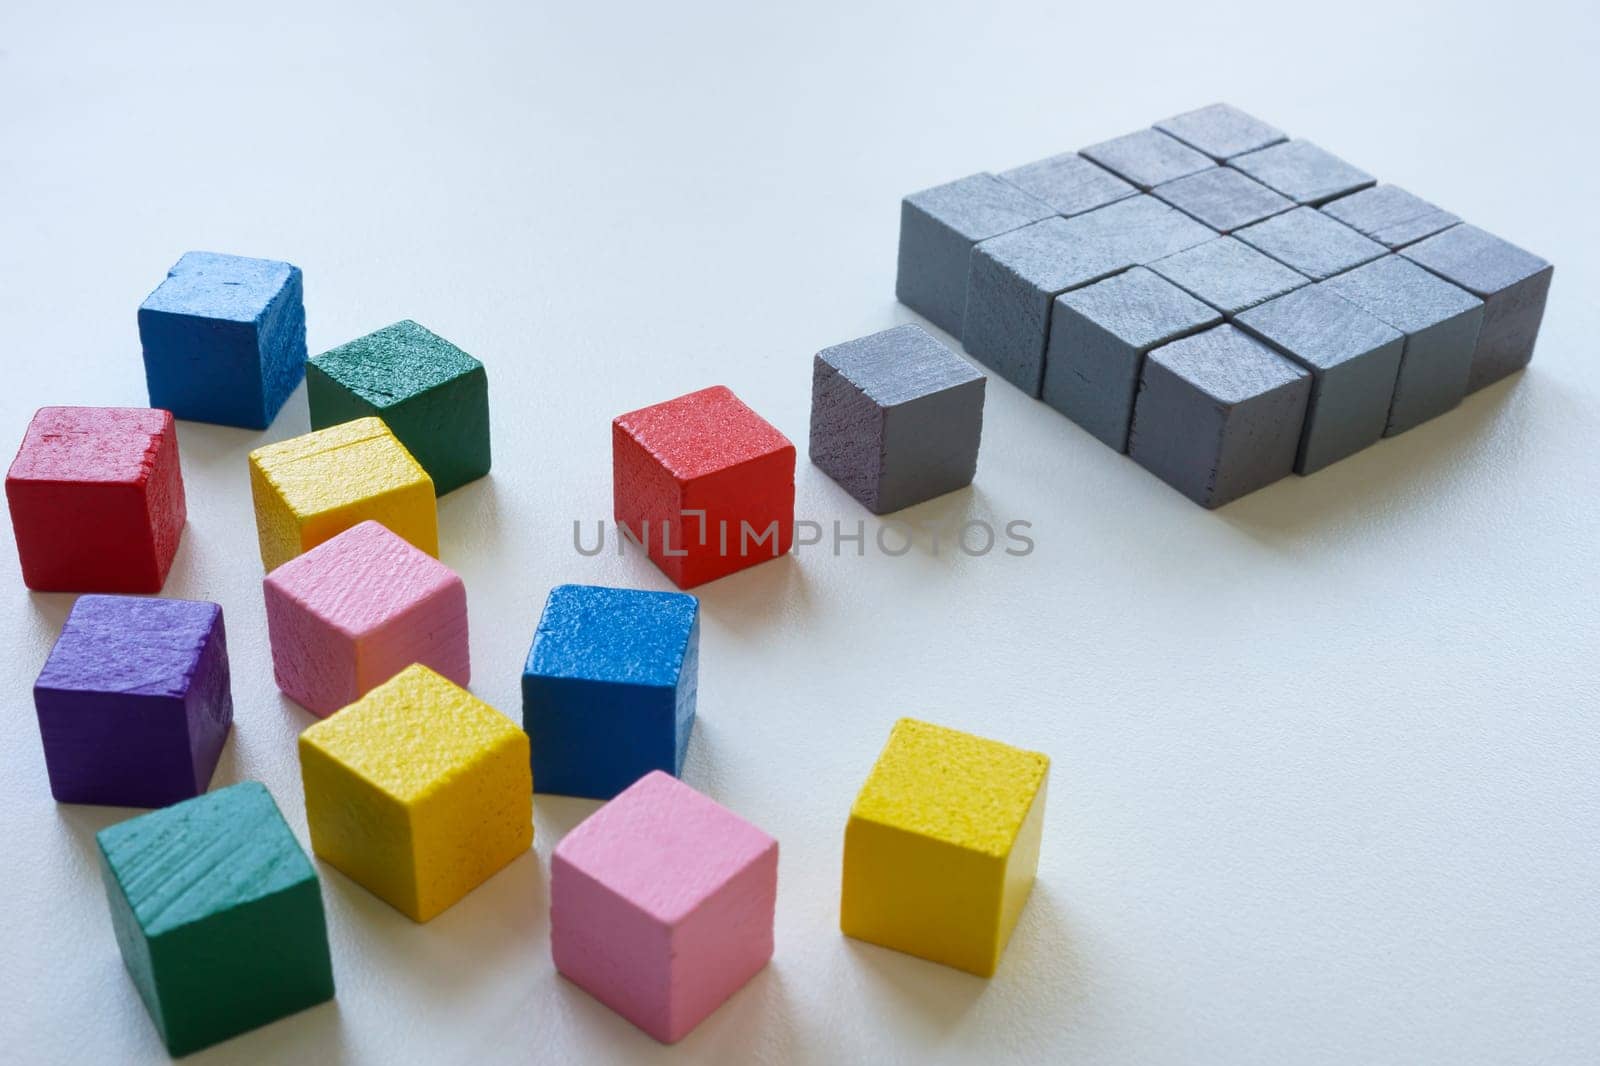 Diversity or order concept. Colored cubes and ordered structure of gray ones.